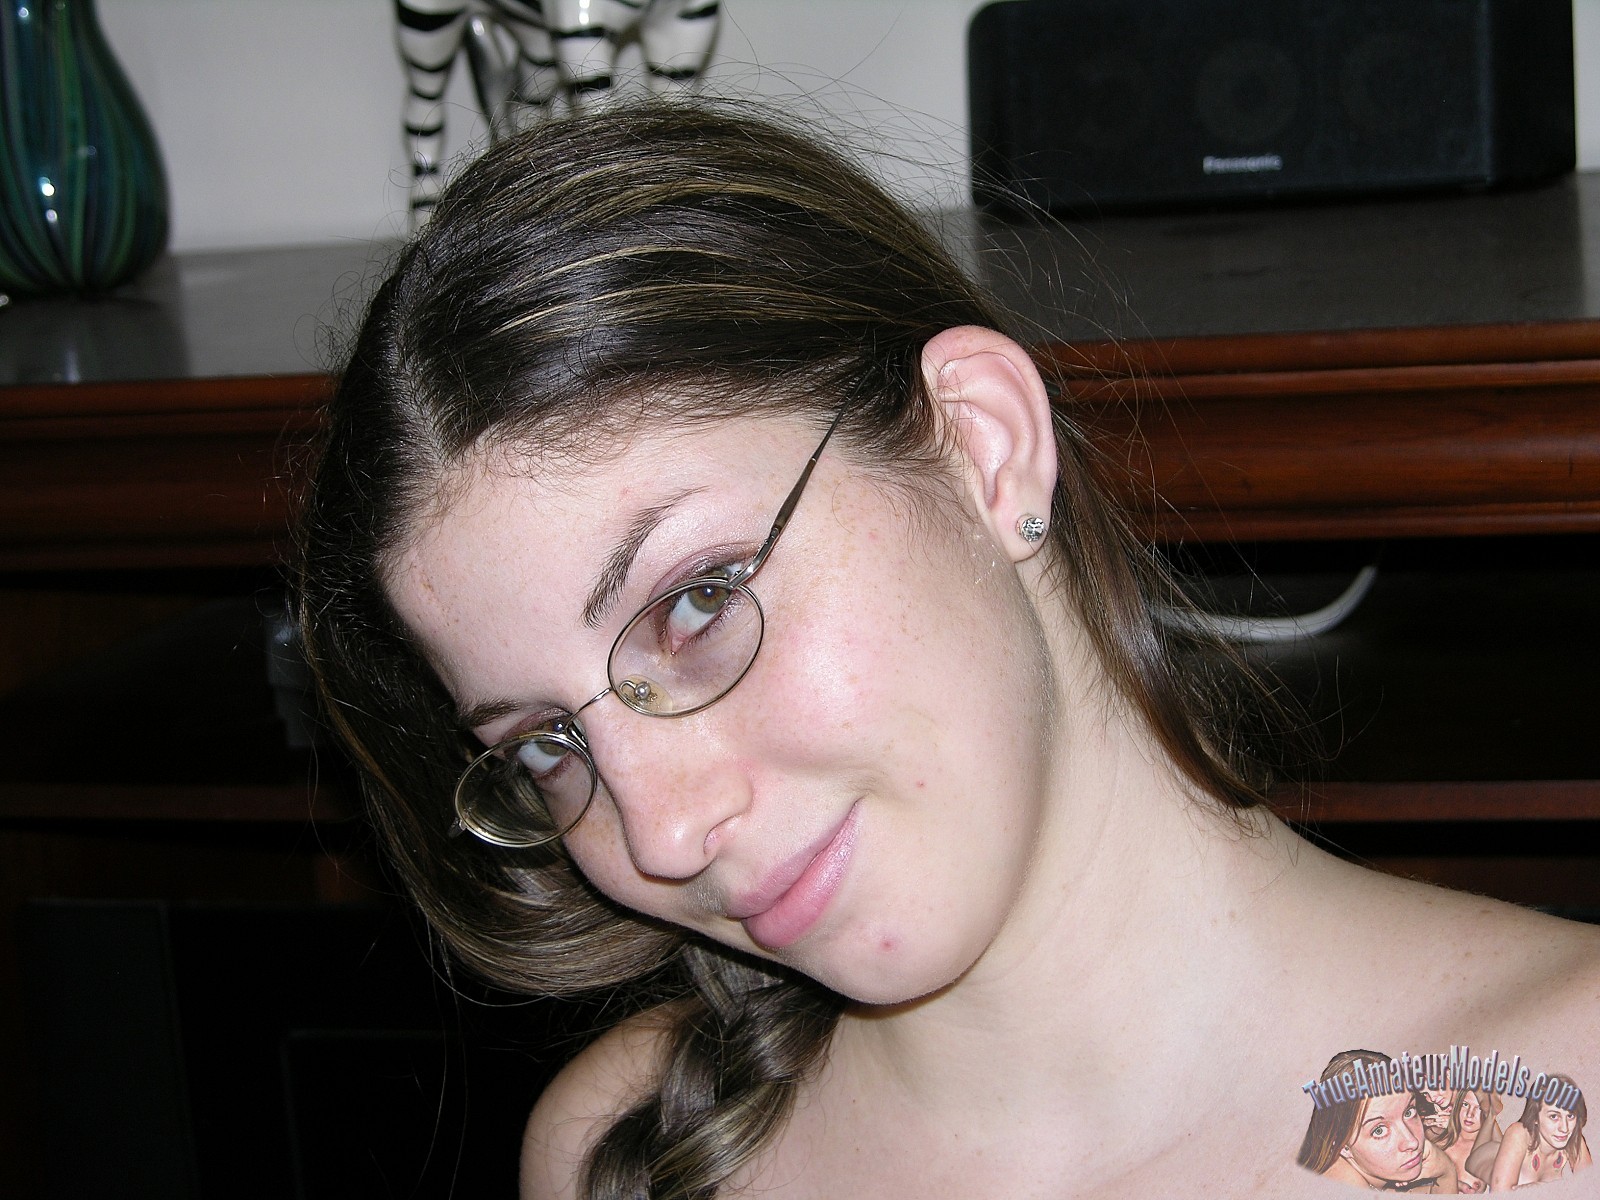 xpics - sex in glasses Amateur tiny breasted petite teen in glasses pic